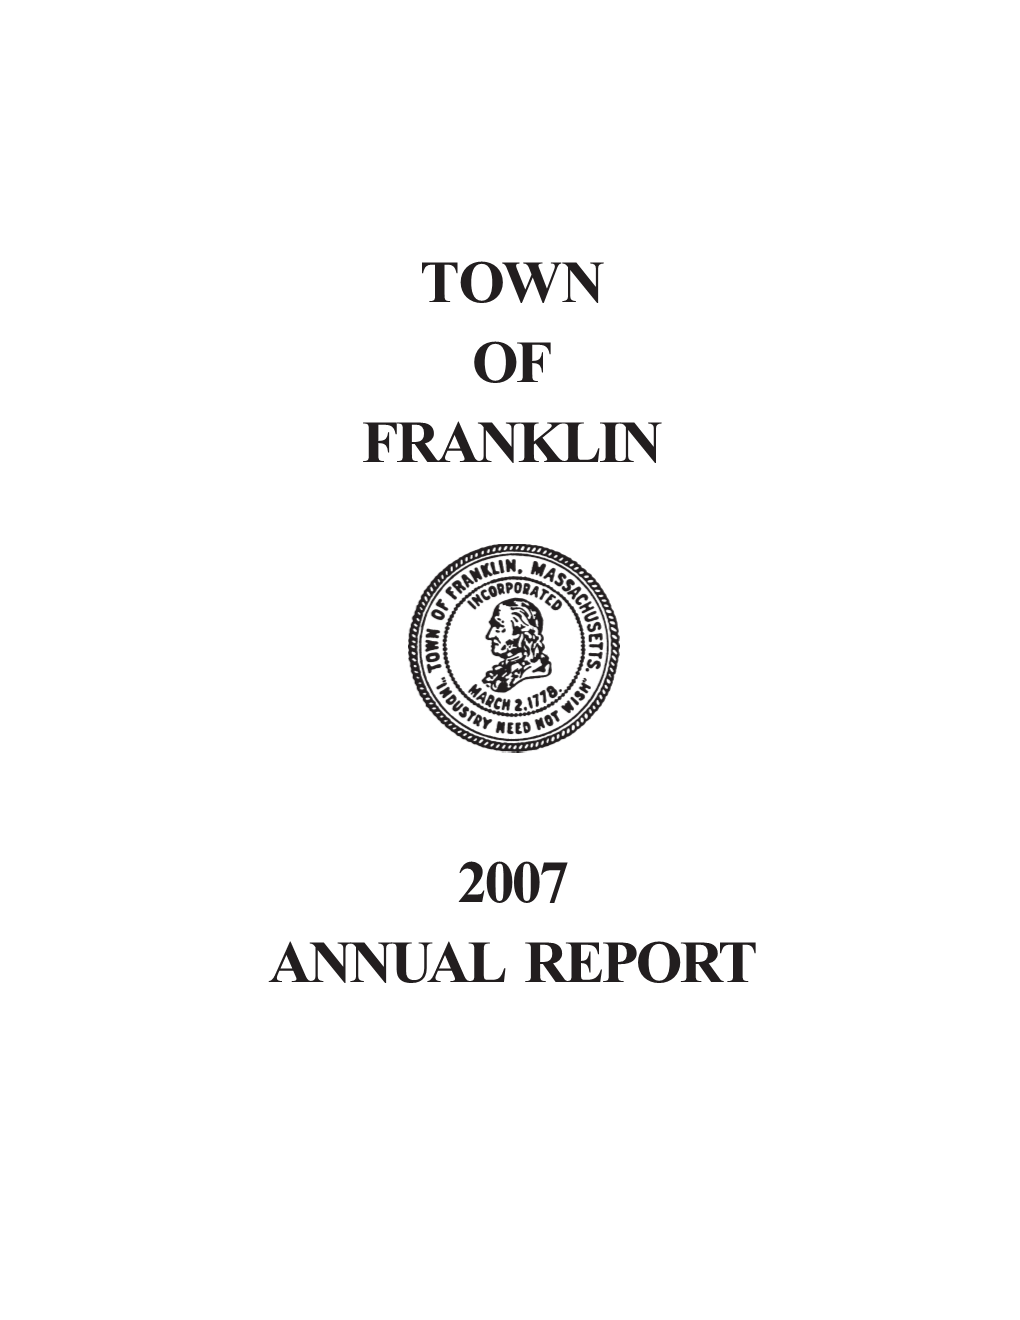 Town of Franklin Annual Report 2007